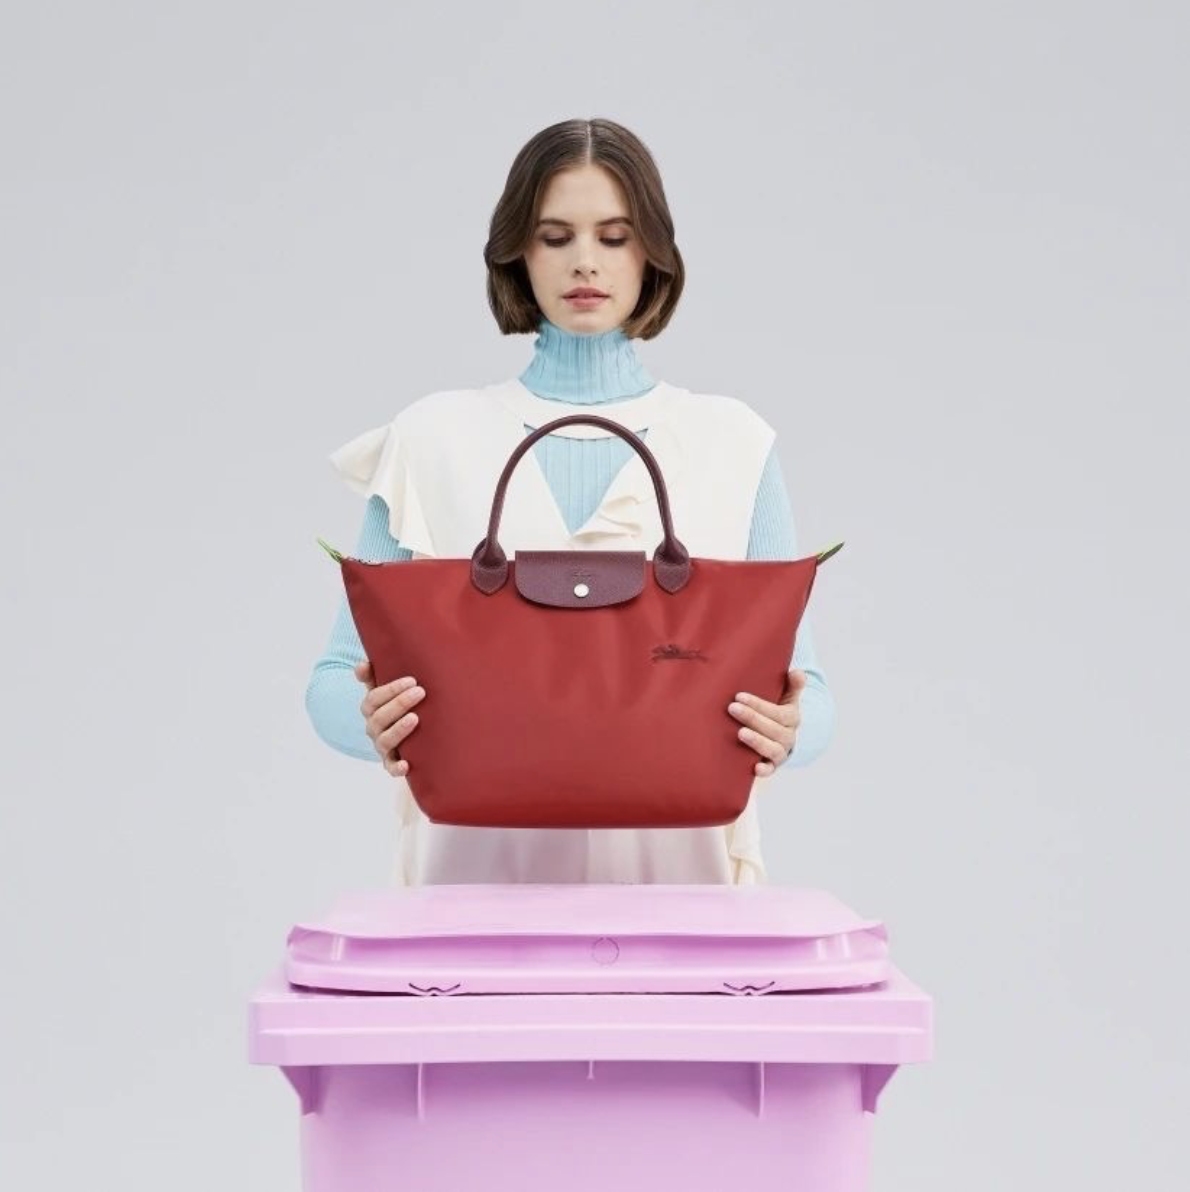 Longchamp: How to Make the Popular 28-year-old Dumpling Bun a Sustainable Benchmark?